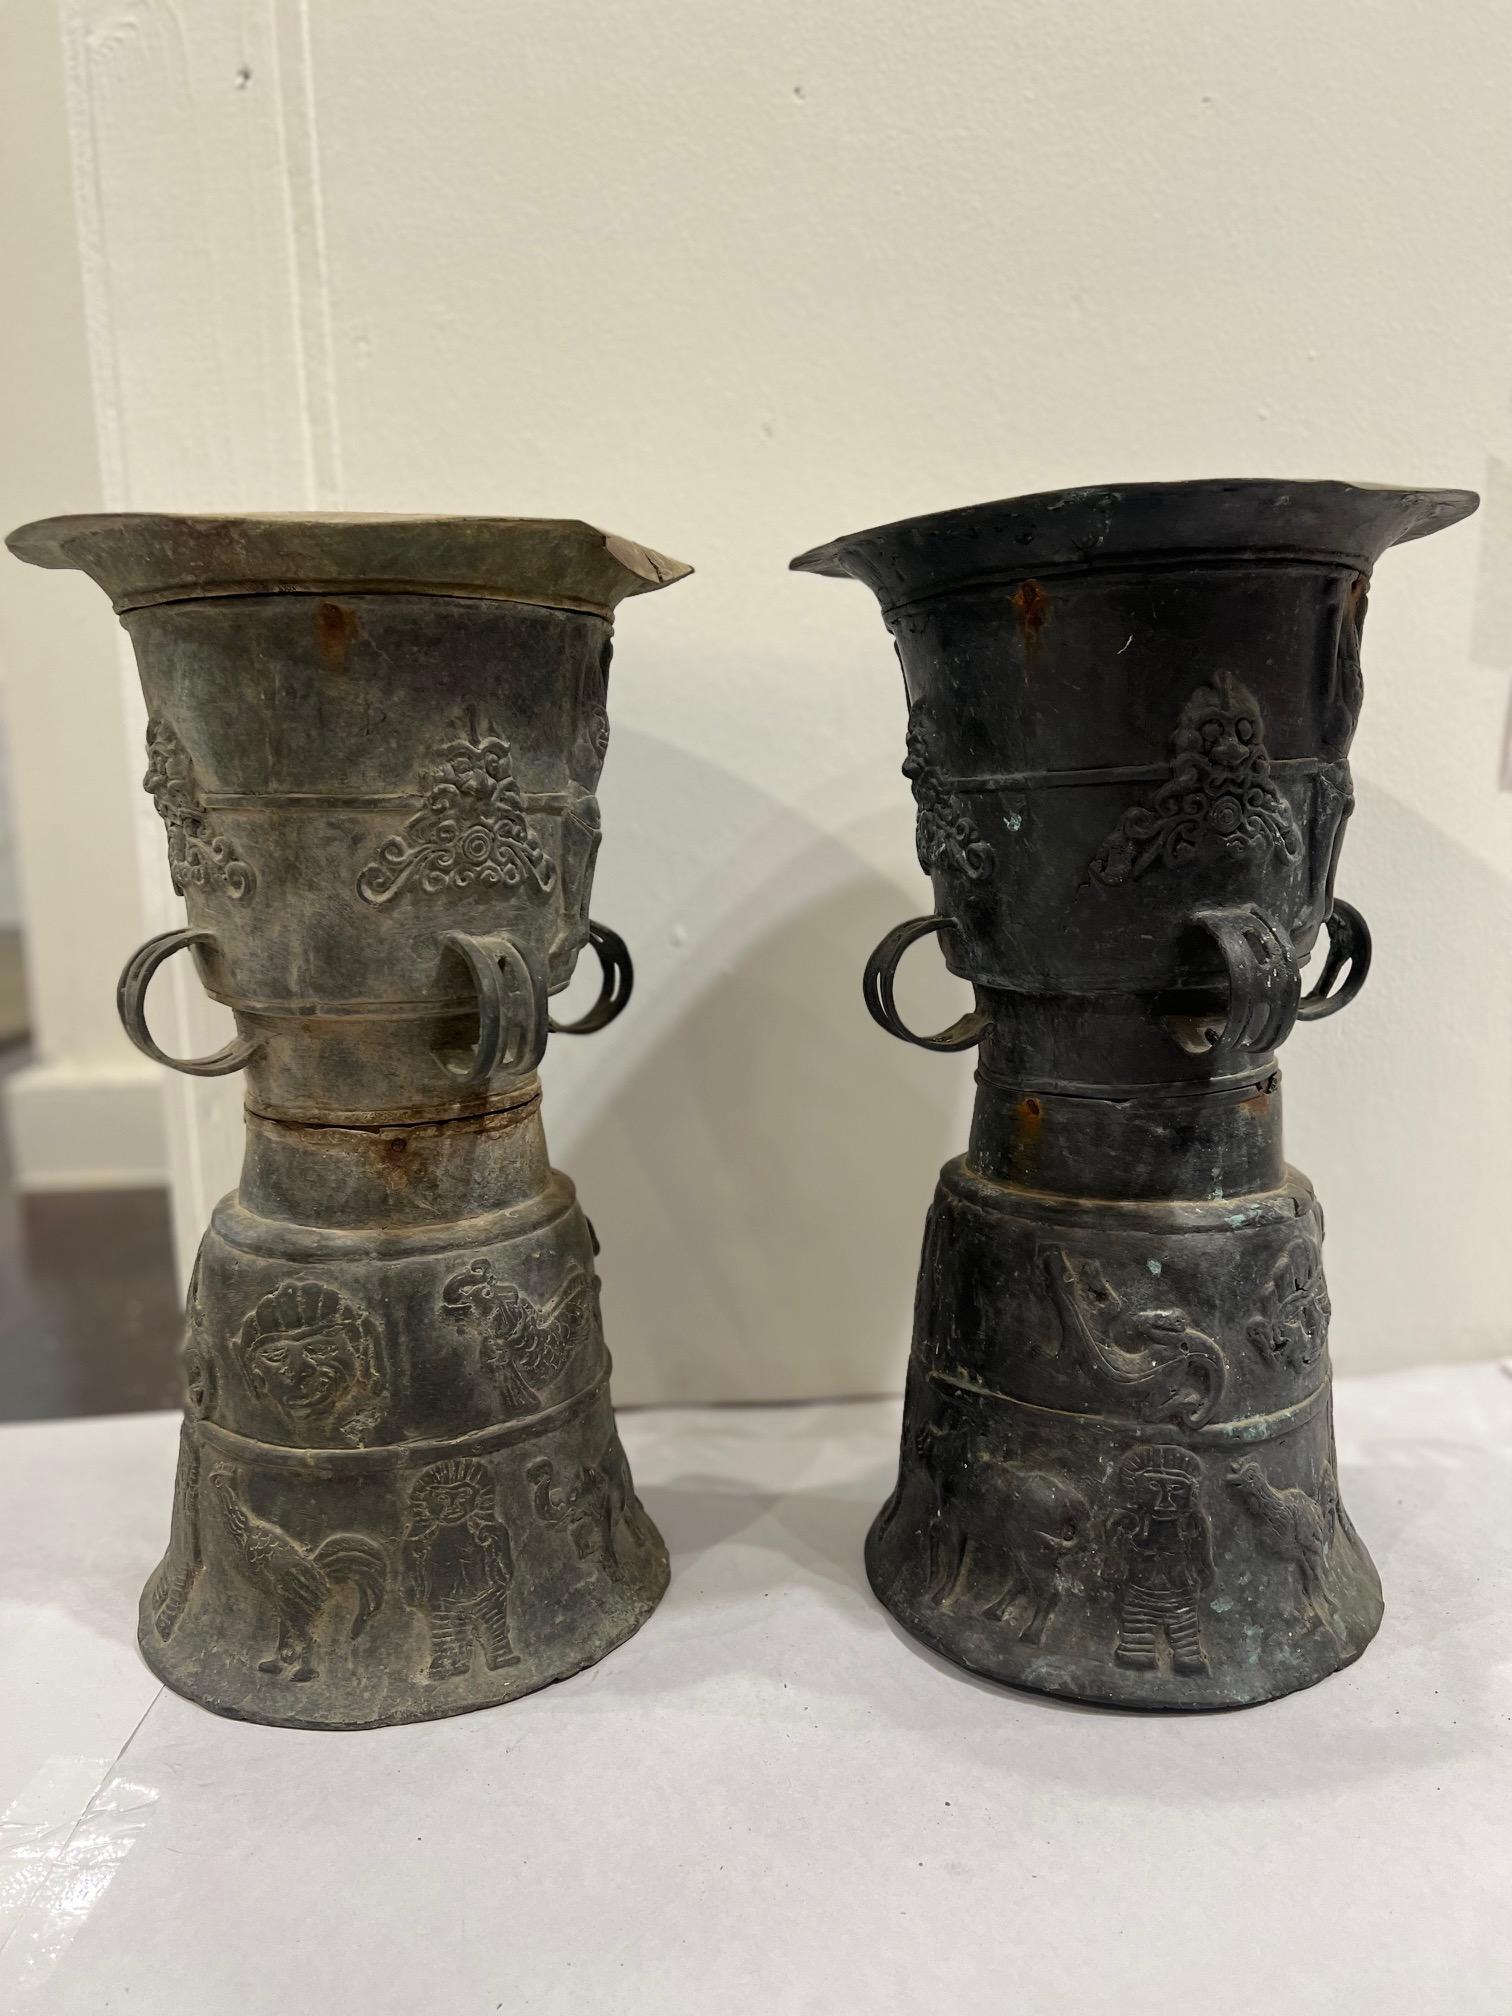 Pair of Southeast Asian ceremonial rain drums. Estimated that the bronze drums dates to the early 19th century. The top surface is adorned with a ceremonial star and tops are not that level, as shown in the photos. Imperfections as shown but they